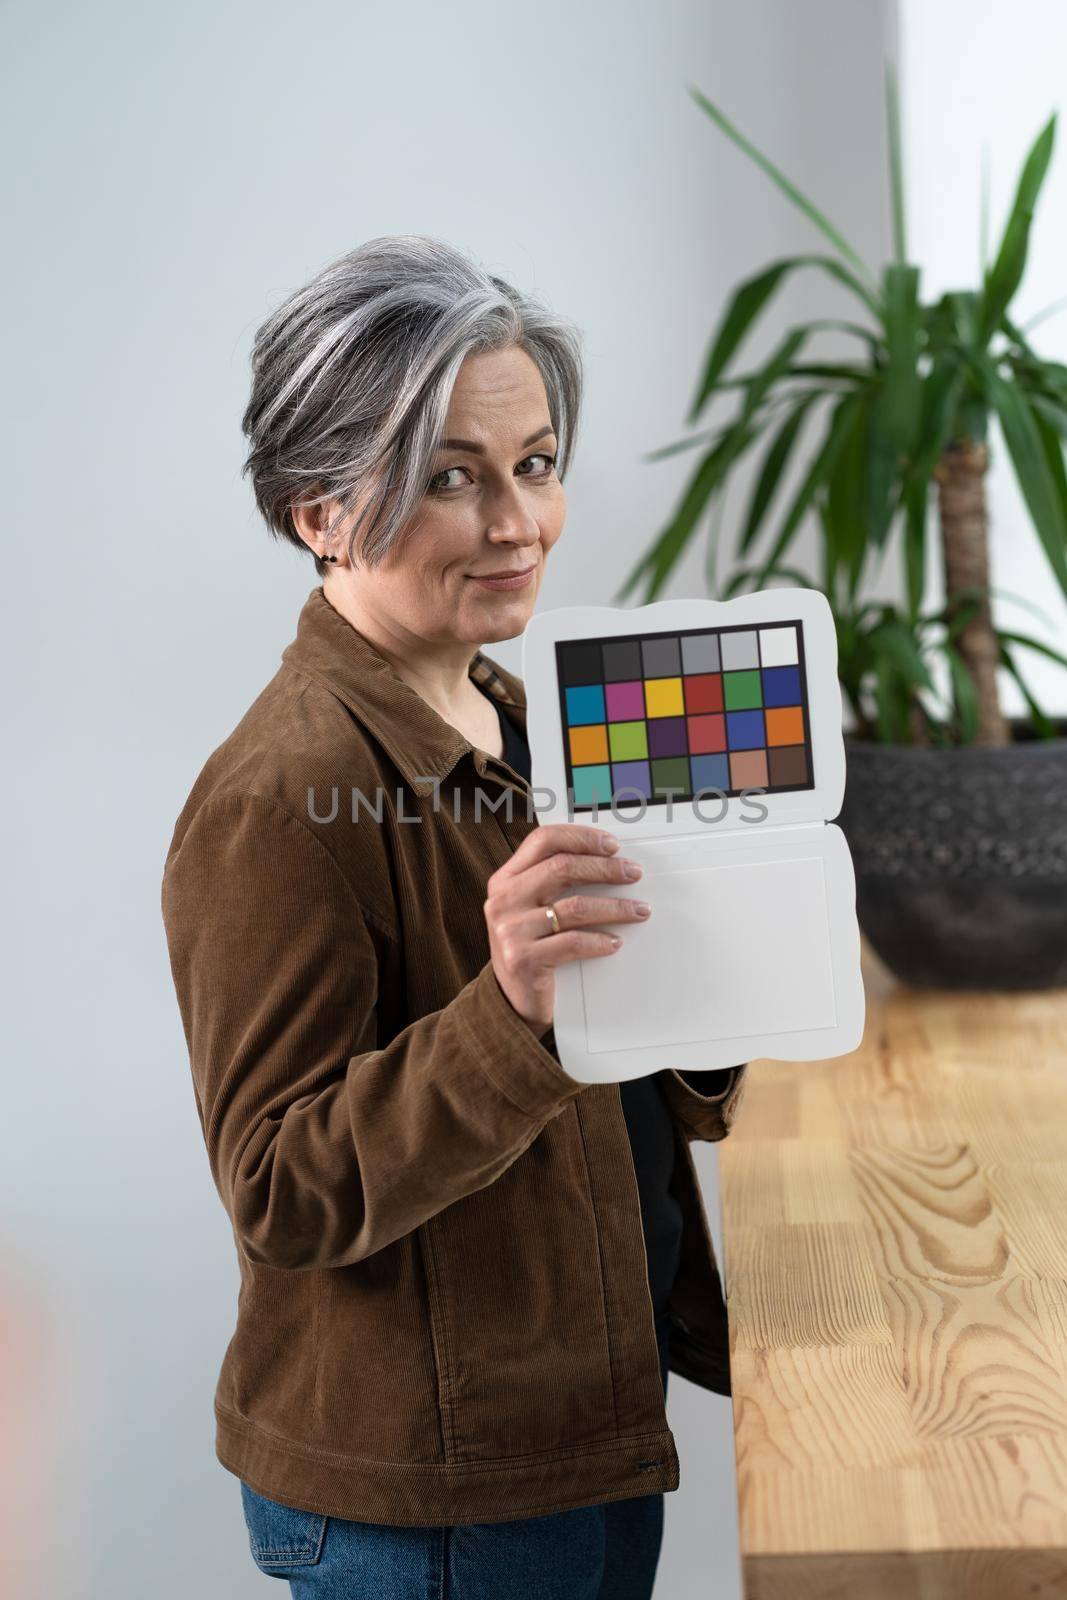 Pretty woman holds color checker or special target for color adjustment while standing in office interior. Gray haired woman showing color palette to adjust the color.